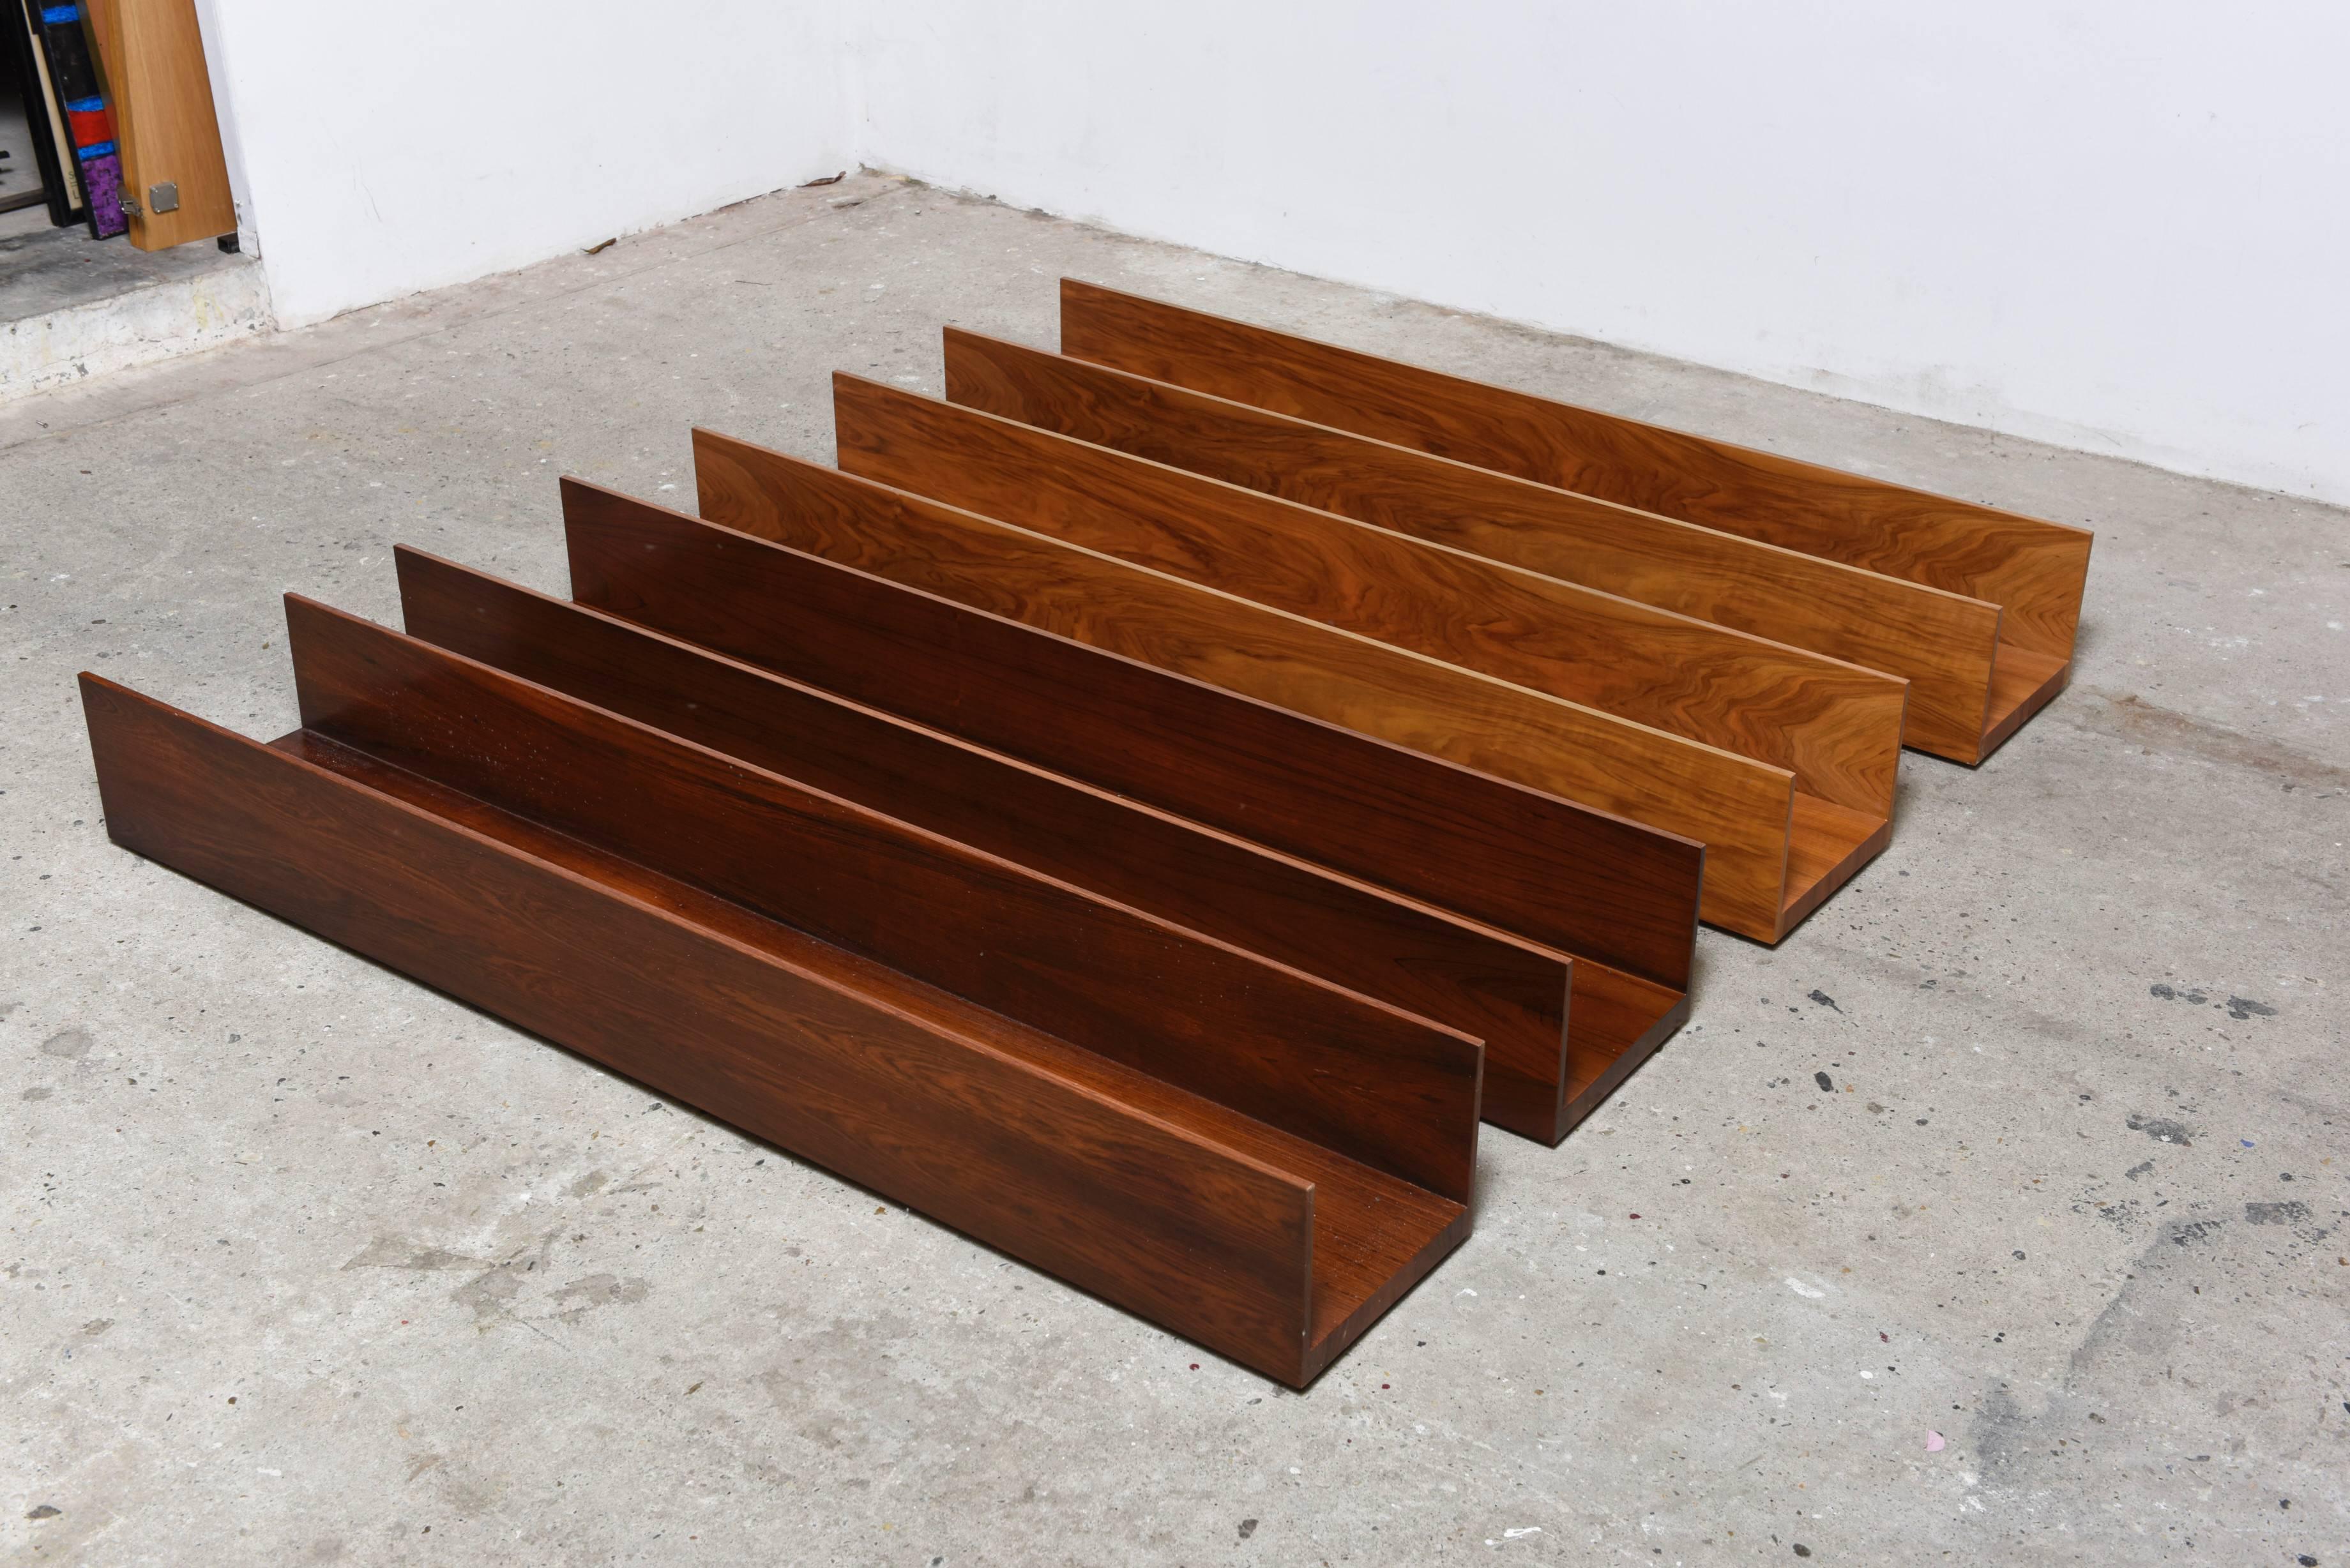 
A rosewood wall-mounted shelves by Walter Wirz for Wilhelm Renz.

